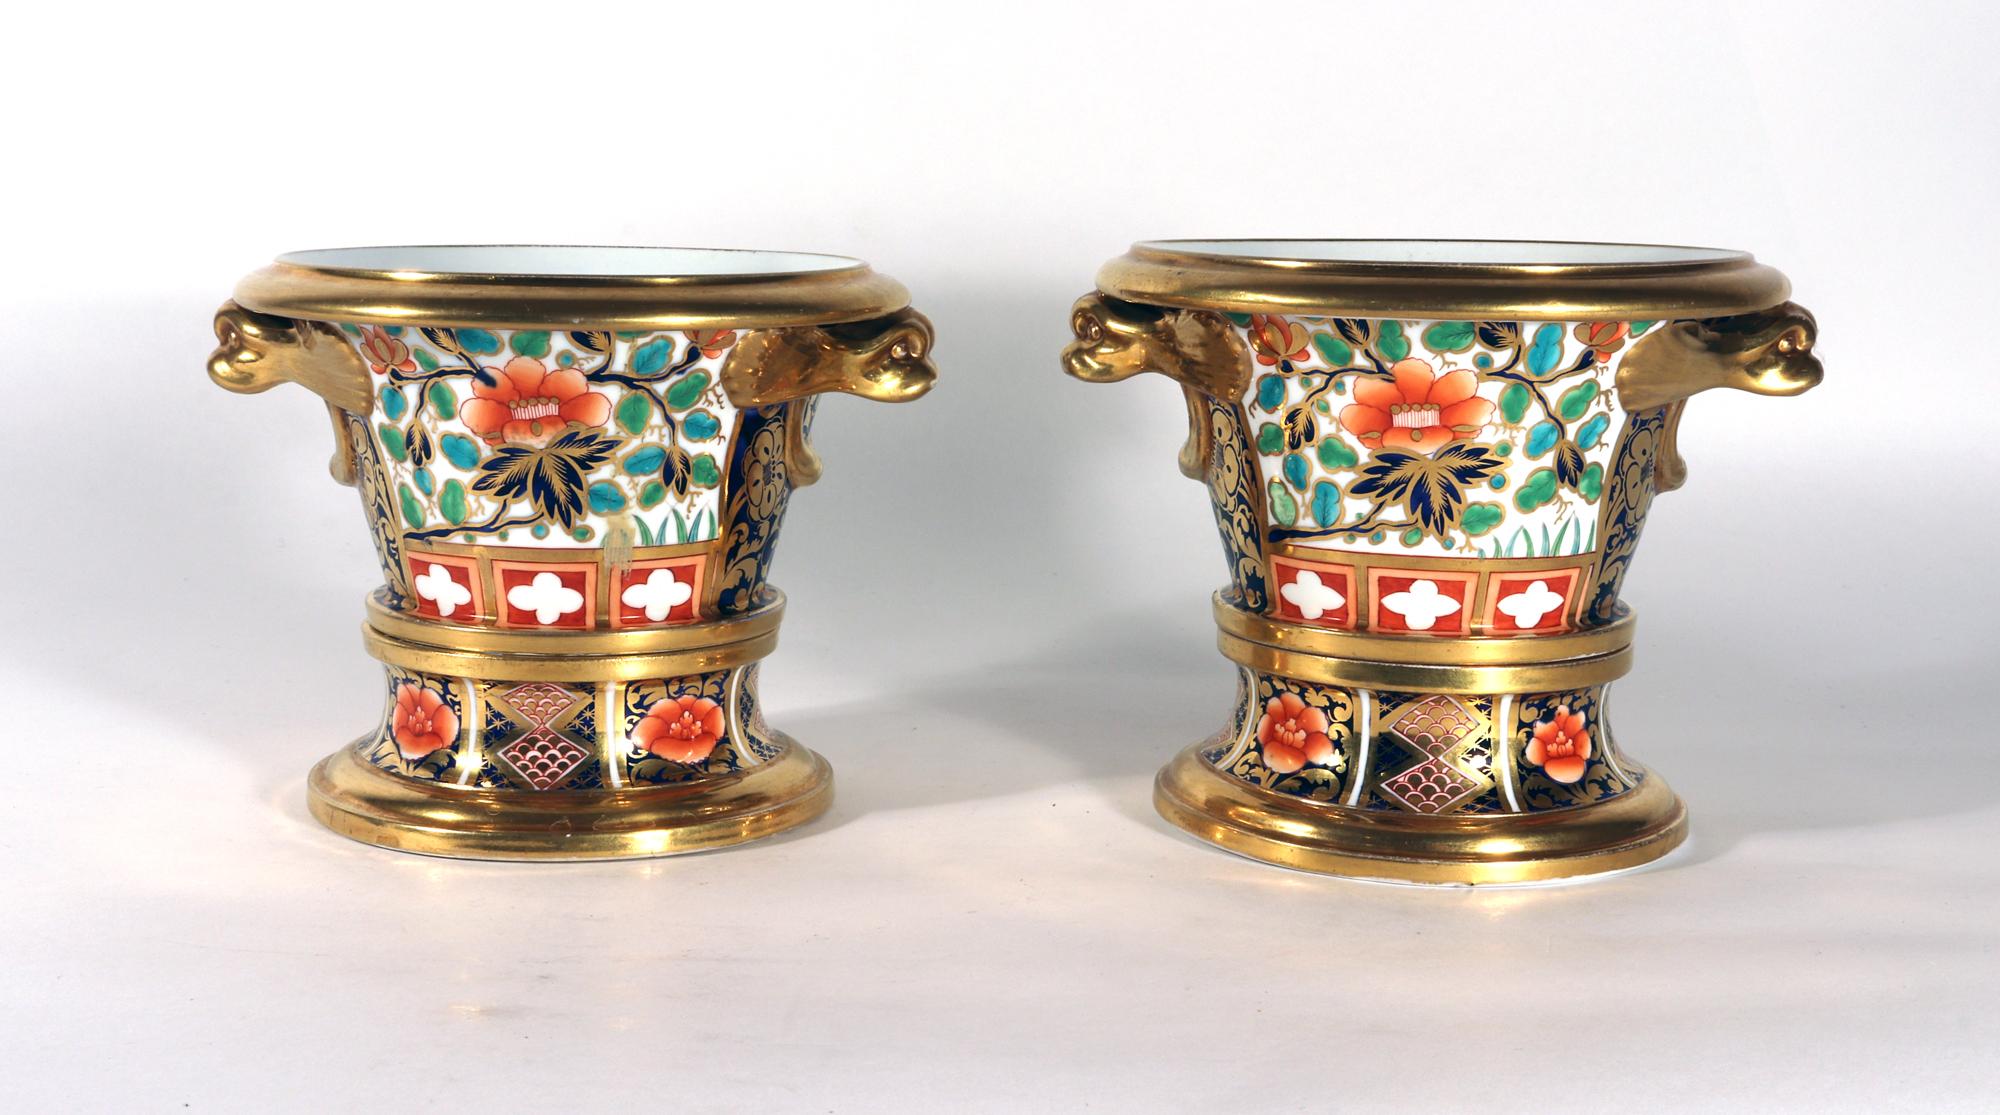 English Regency Porcelain Small Japan-pattern French-form Cache Pots & Stands,
Pattern 1250,
Spode Factory,
Circa 1800-10

The pair of Regency English porcelain cache pots and stands are beautifully painted in Imari coloration also known as